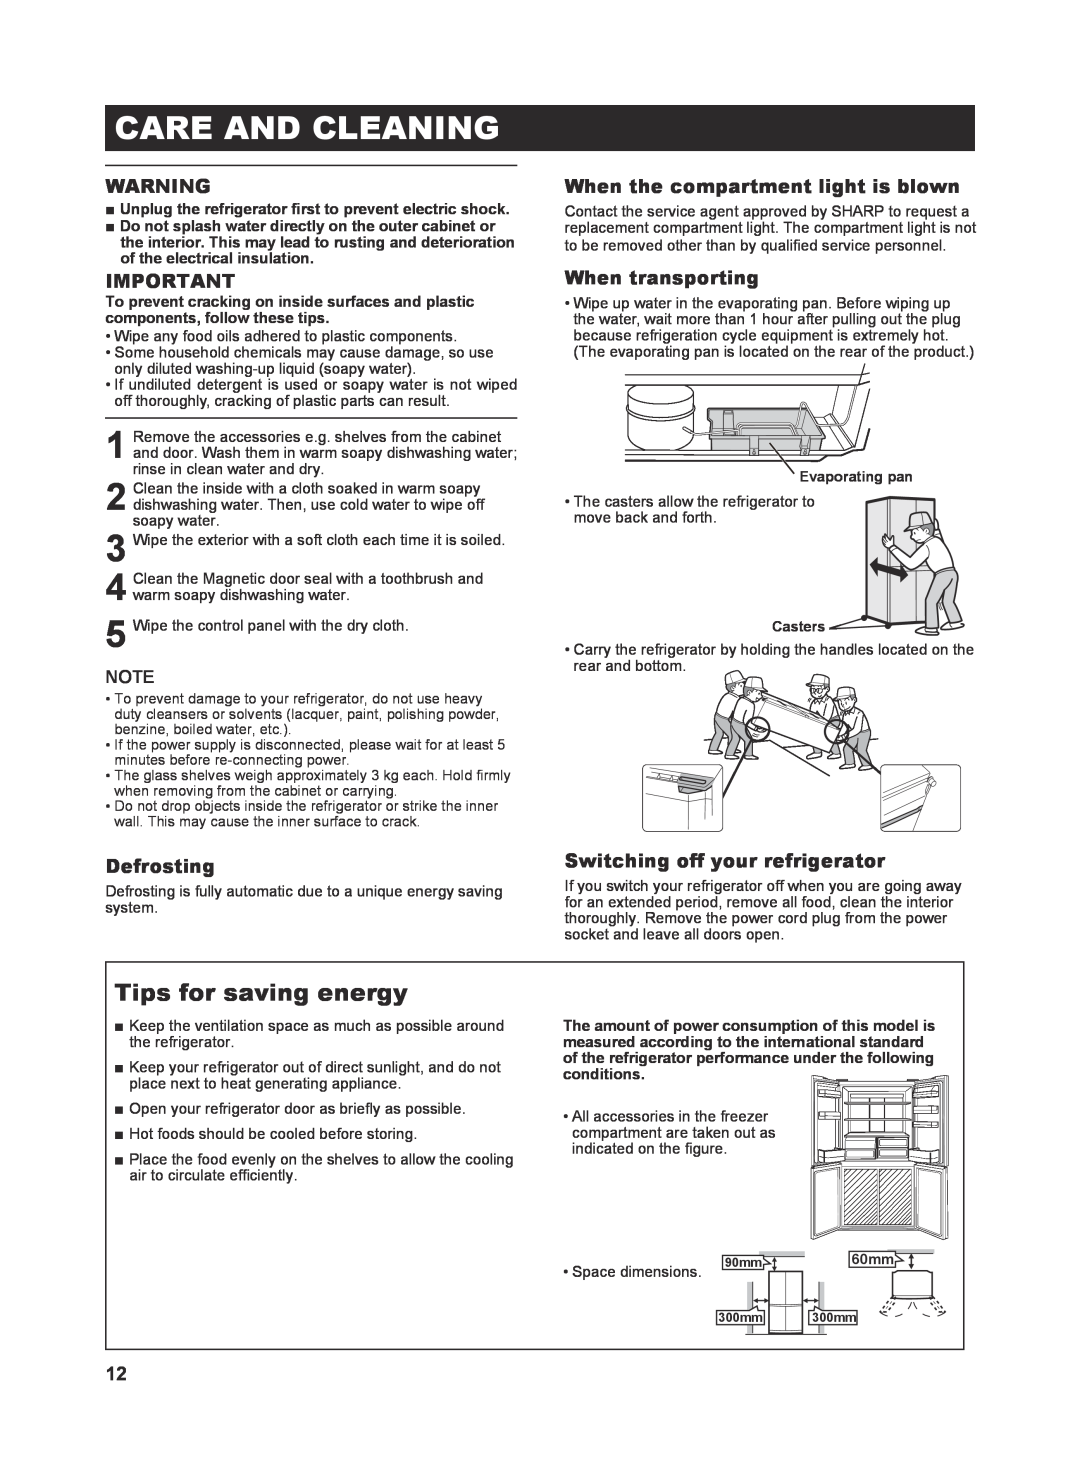 Sharp SJ-FP810V operation manual Care And Cleaning, Tips for saving energy, Defrosting, When the compartment light is blown 